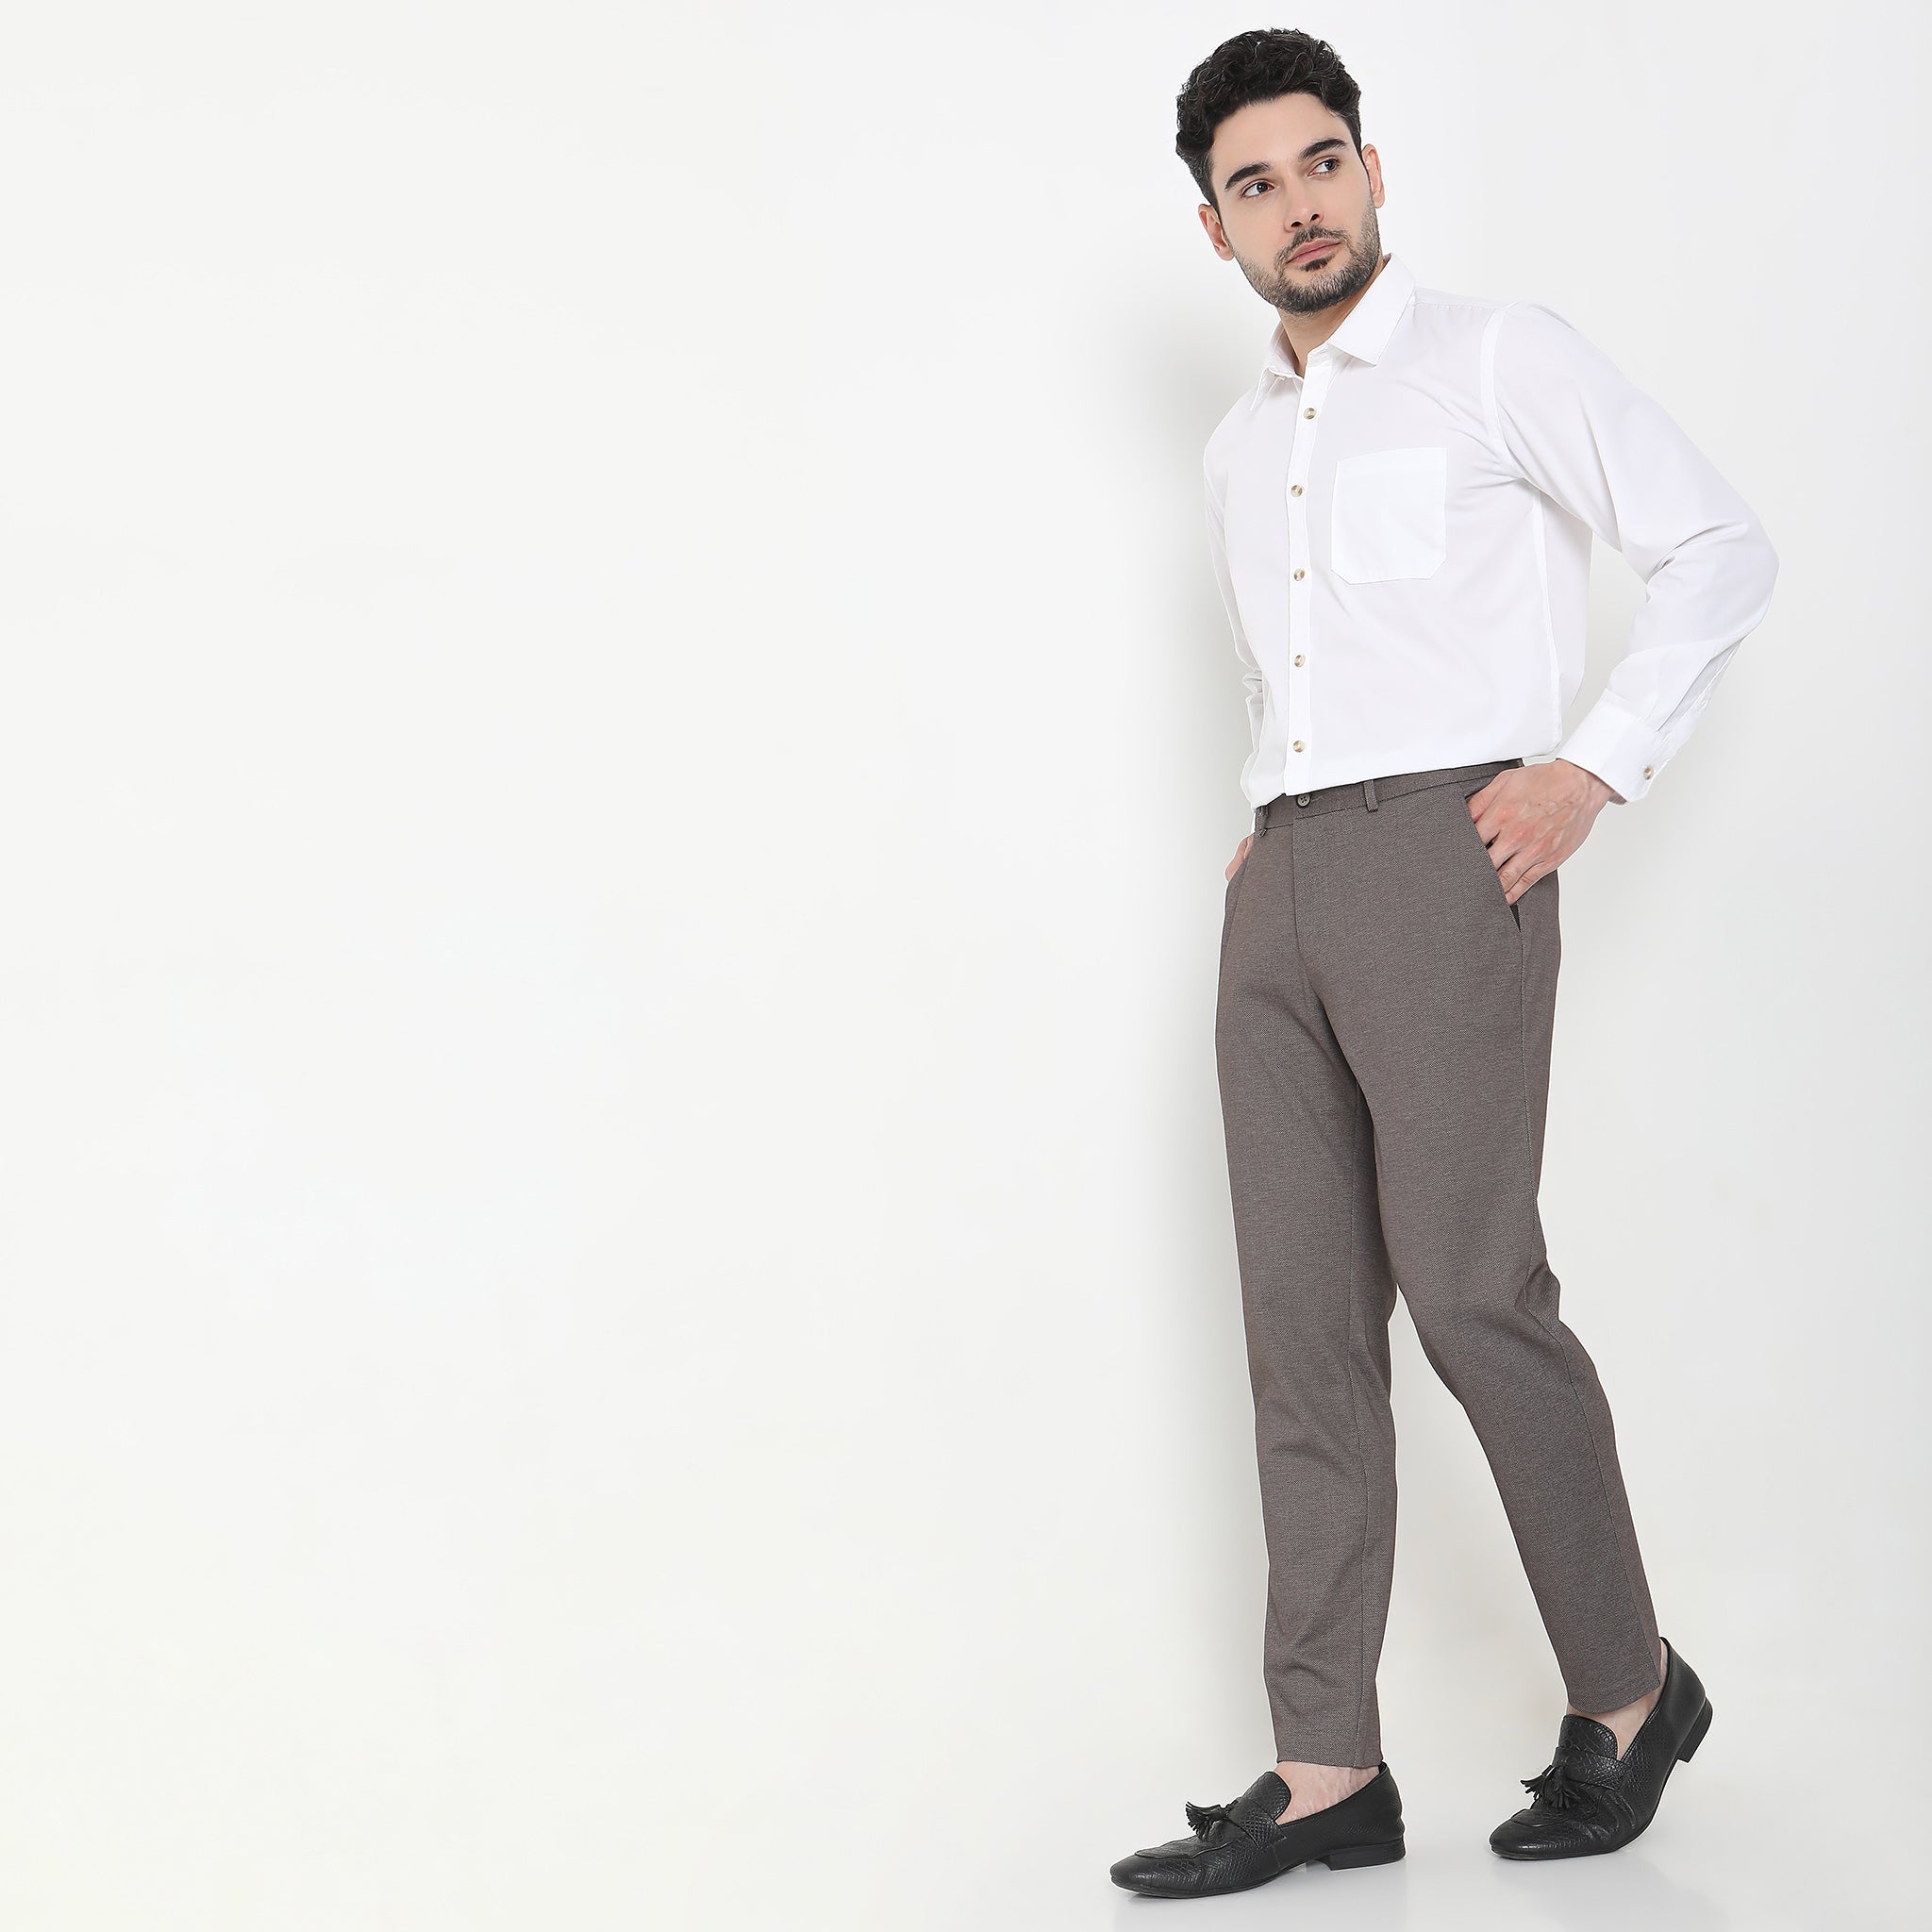 MANCREW Men's Solid Grey Trousers Pack 2